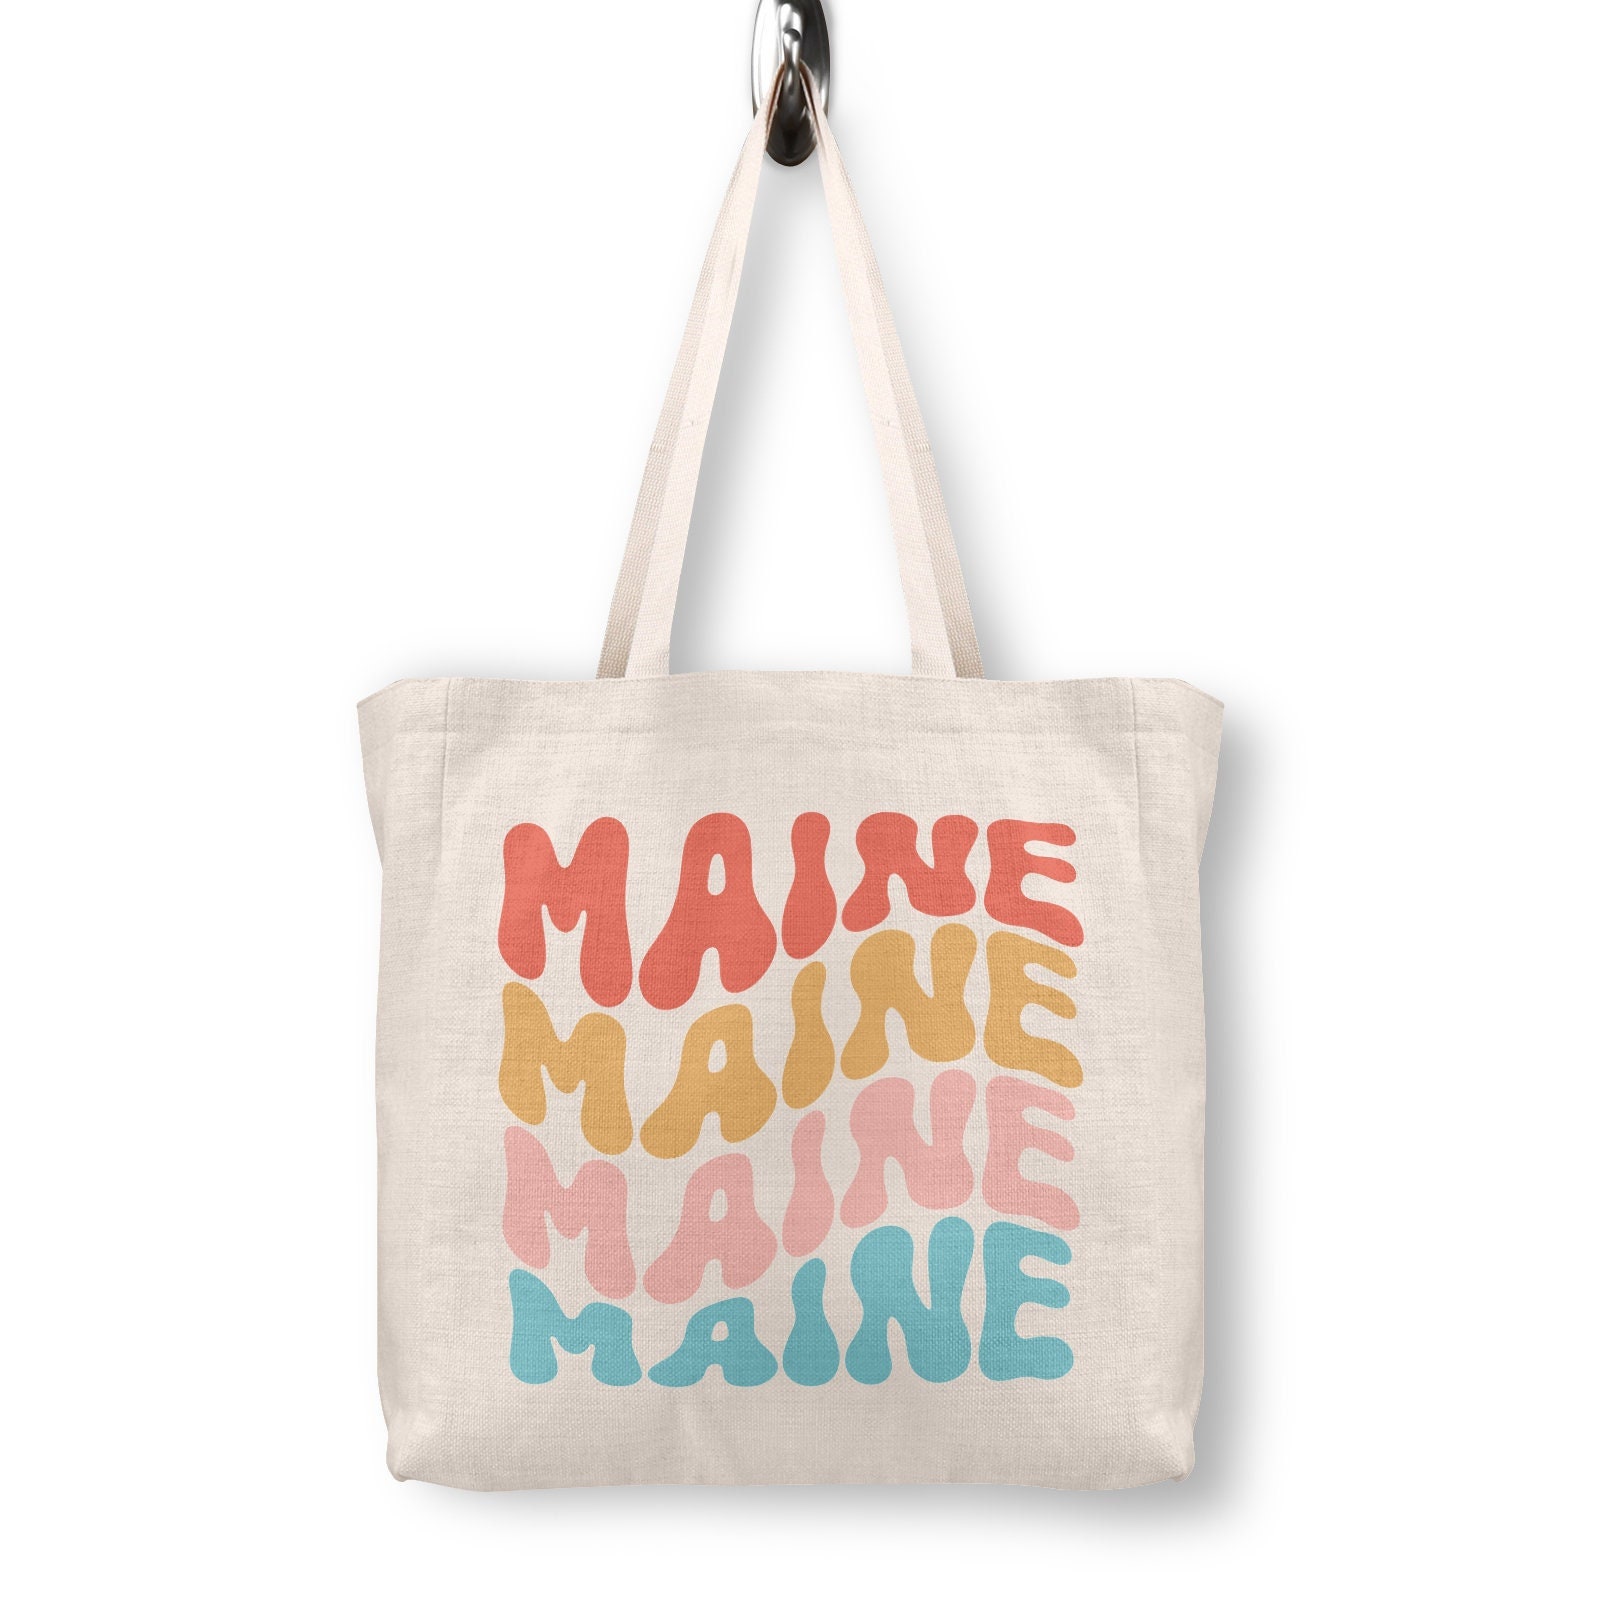 Favorite Luggage and Tote Bags from My Maine Trip